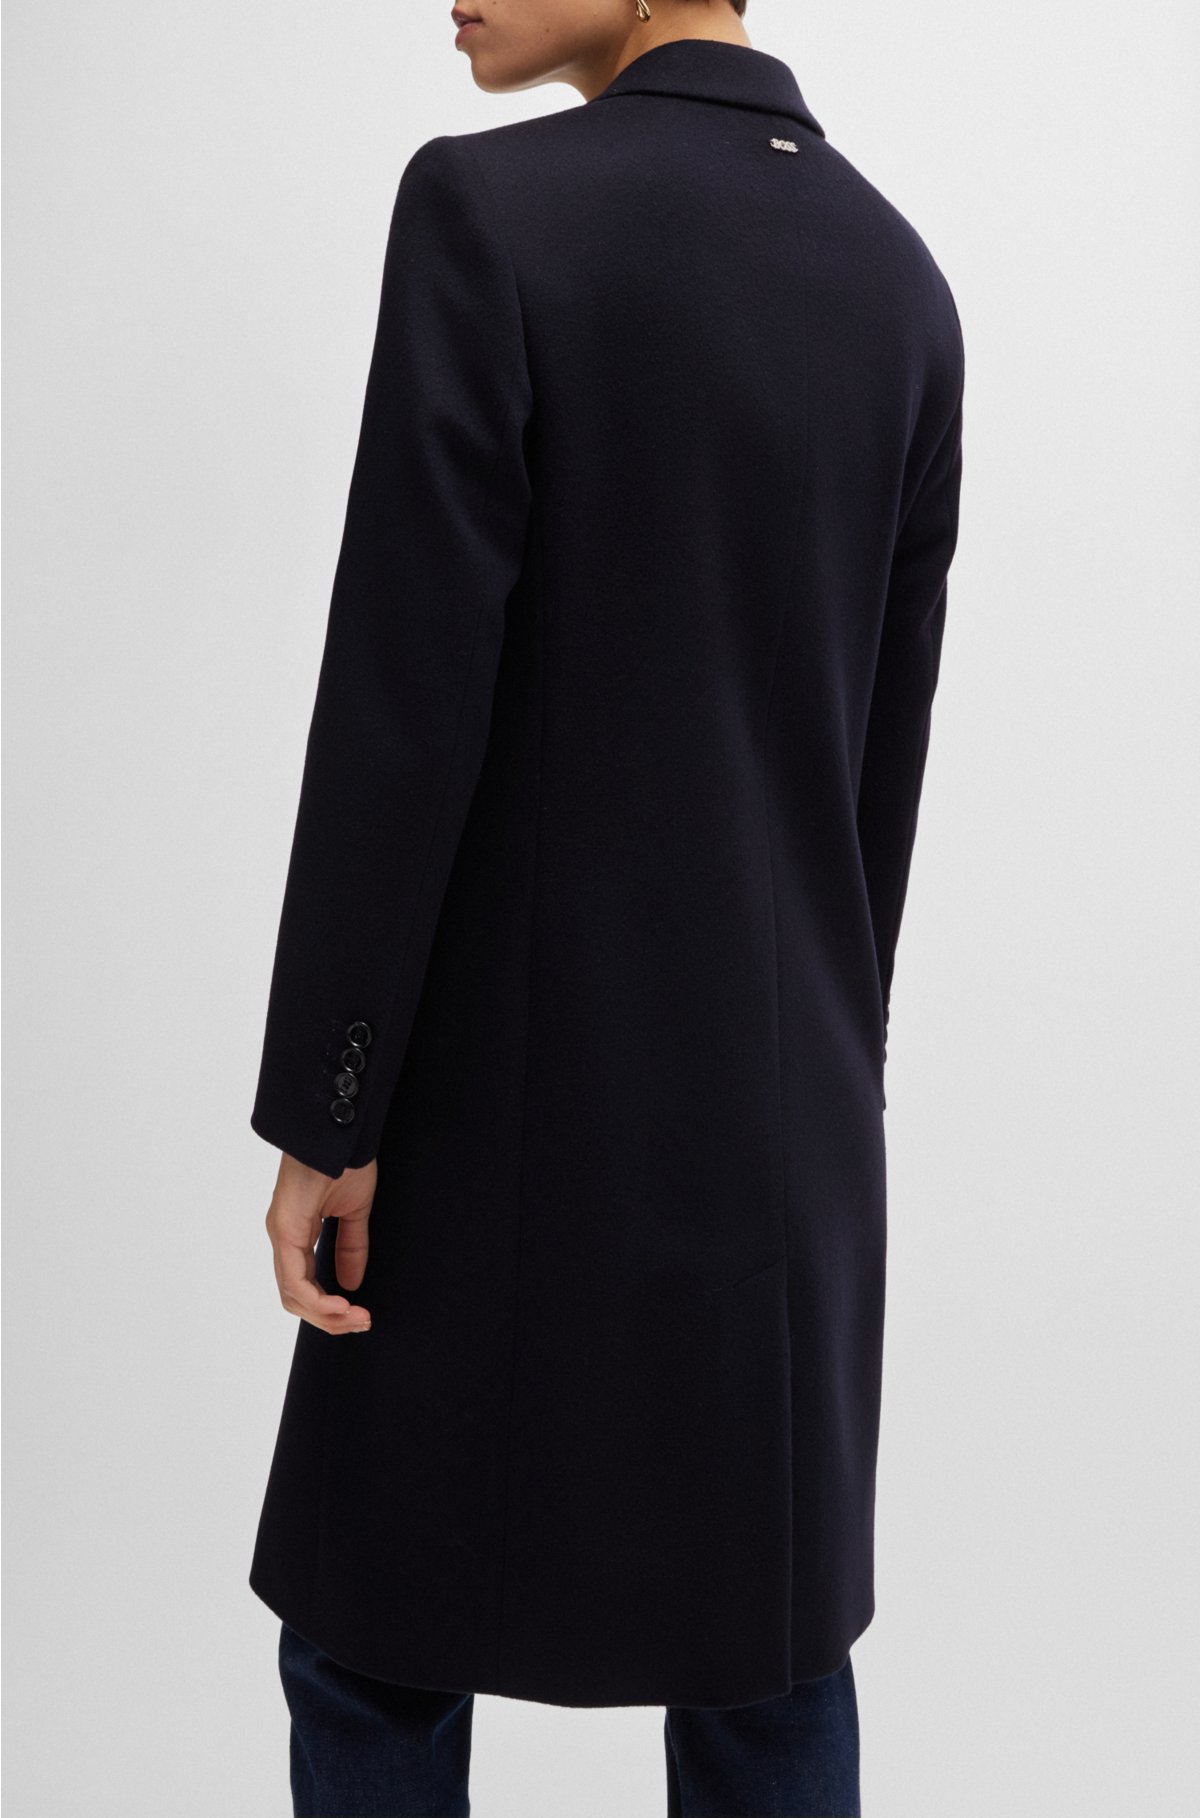 BOSS - Slim-fit coat in virgin wool and cashmere